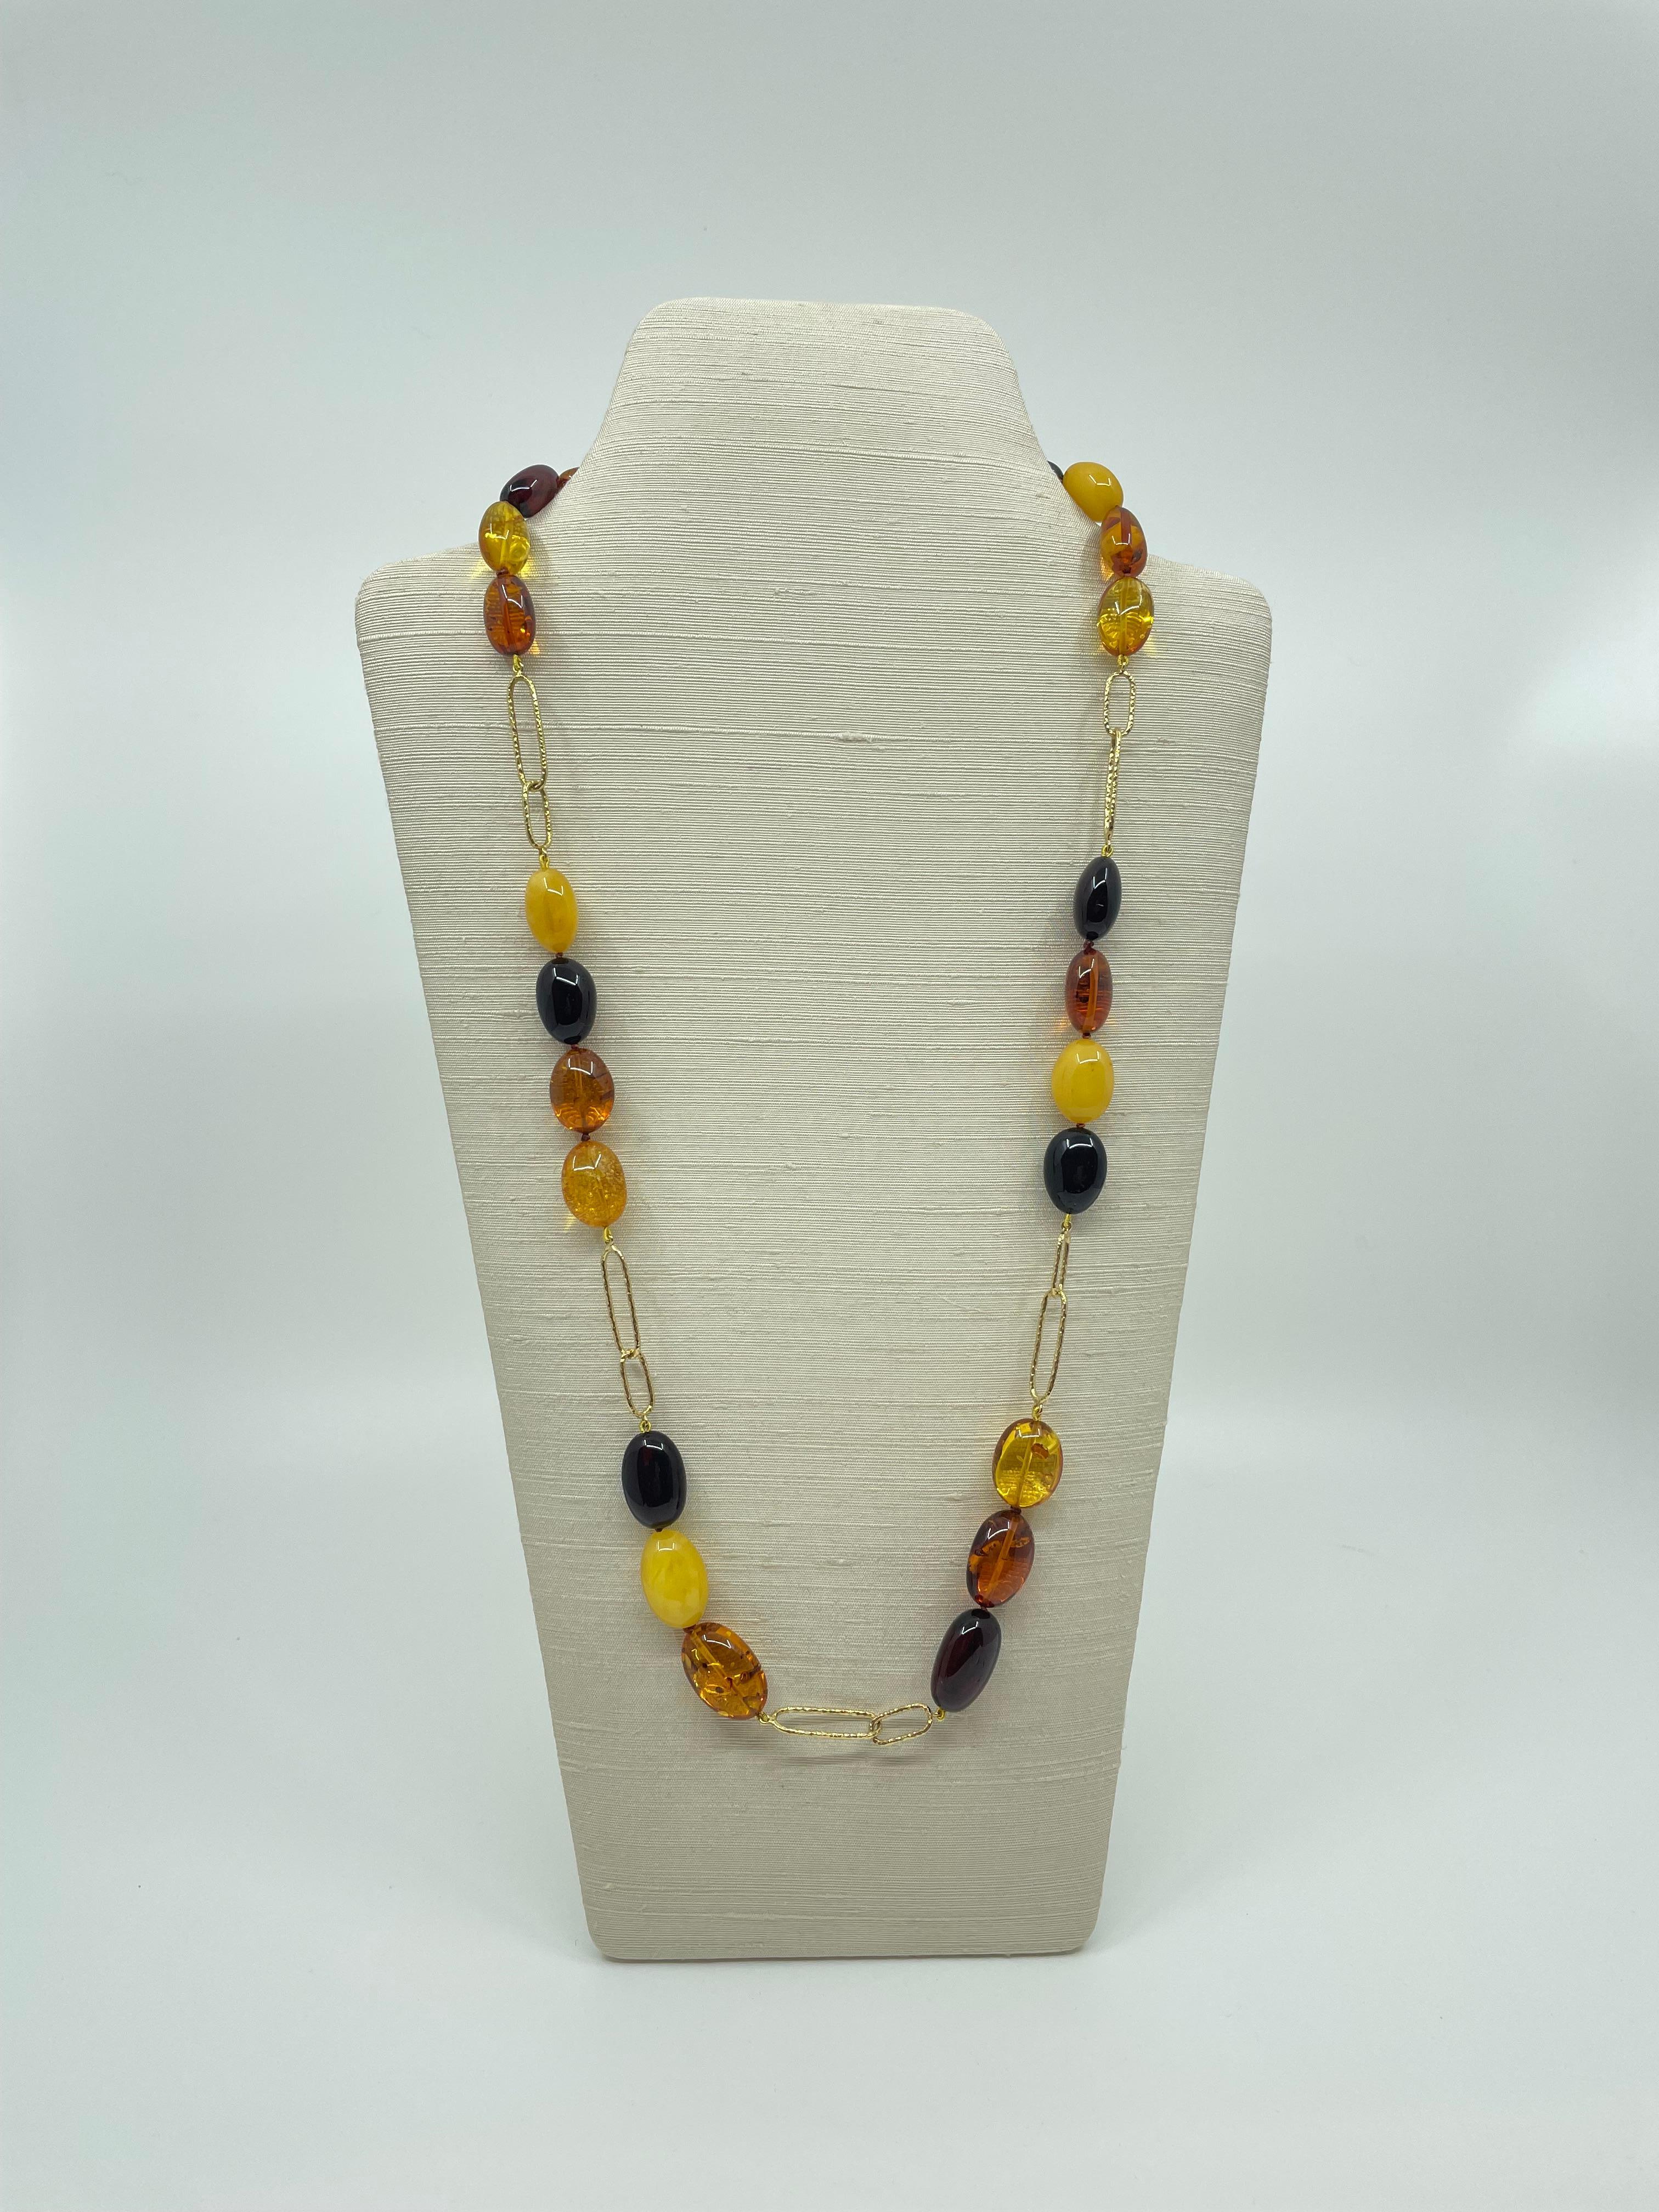 A fabulous 28” L (71.2cmL) necklace with oval Baltic amber beads in butterscotch, lemon, honey and cognac colors, 18k granulated gold links and a granulated 18k gold toggle clasp. 

These beautiful organic gems, with their glorious golden color